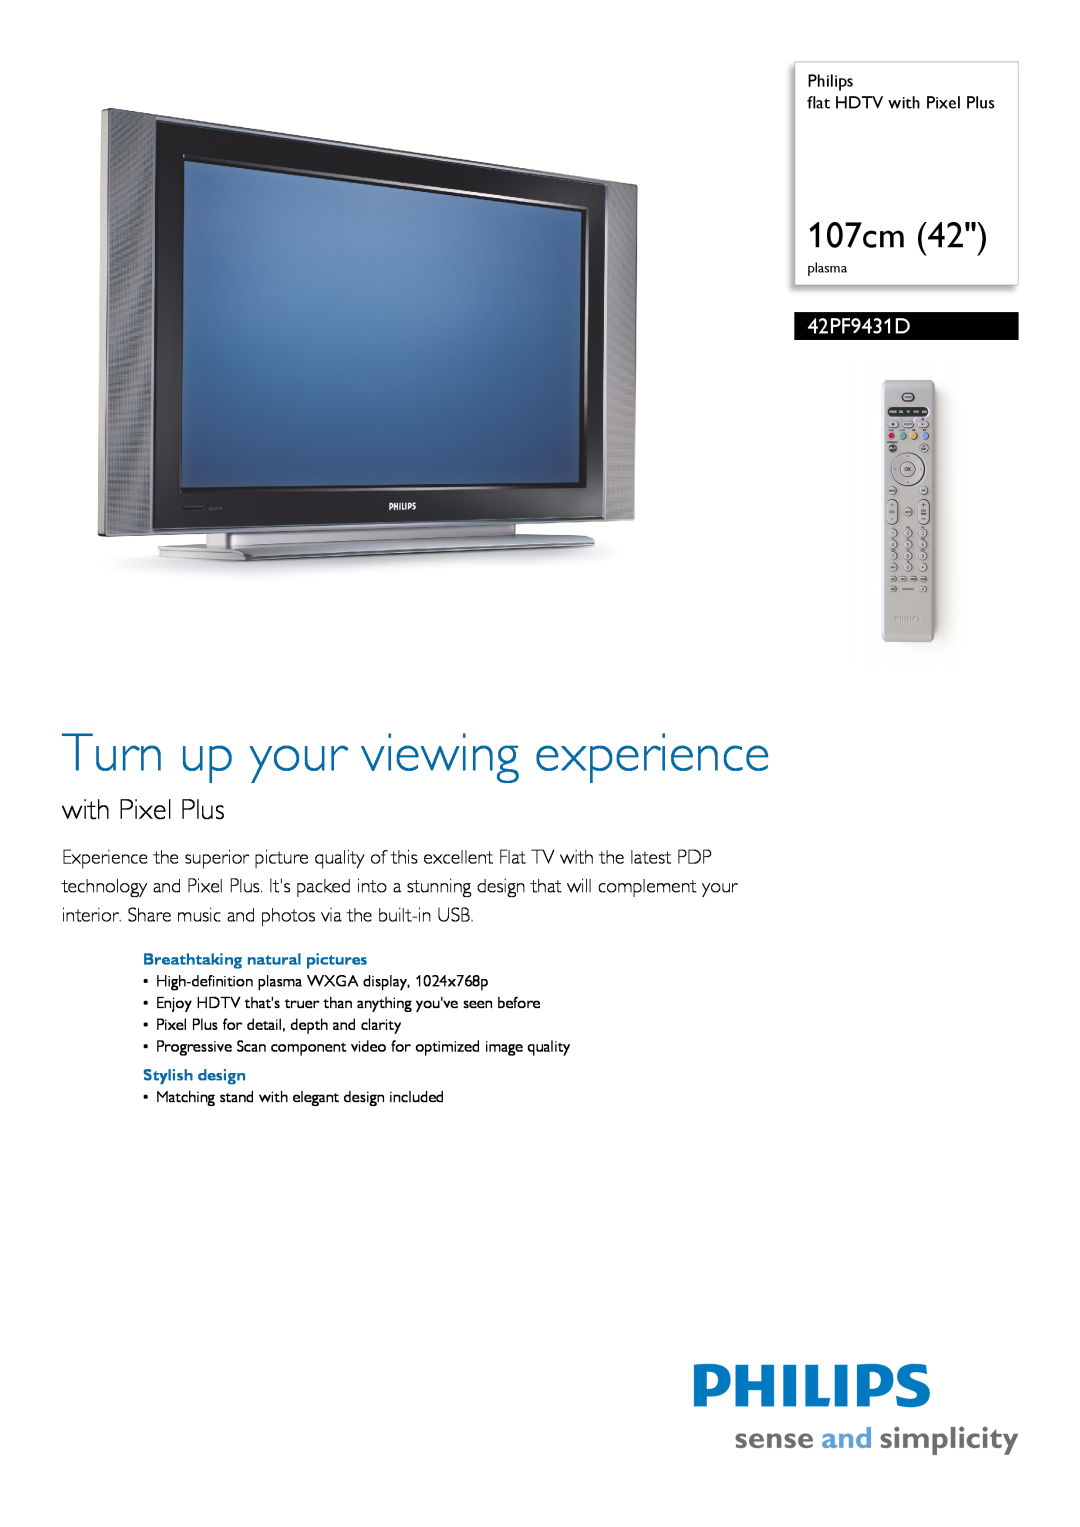 Philips 42PF9431D manual Turn up your viewing experience, 107cm, with Pixel Plus 